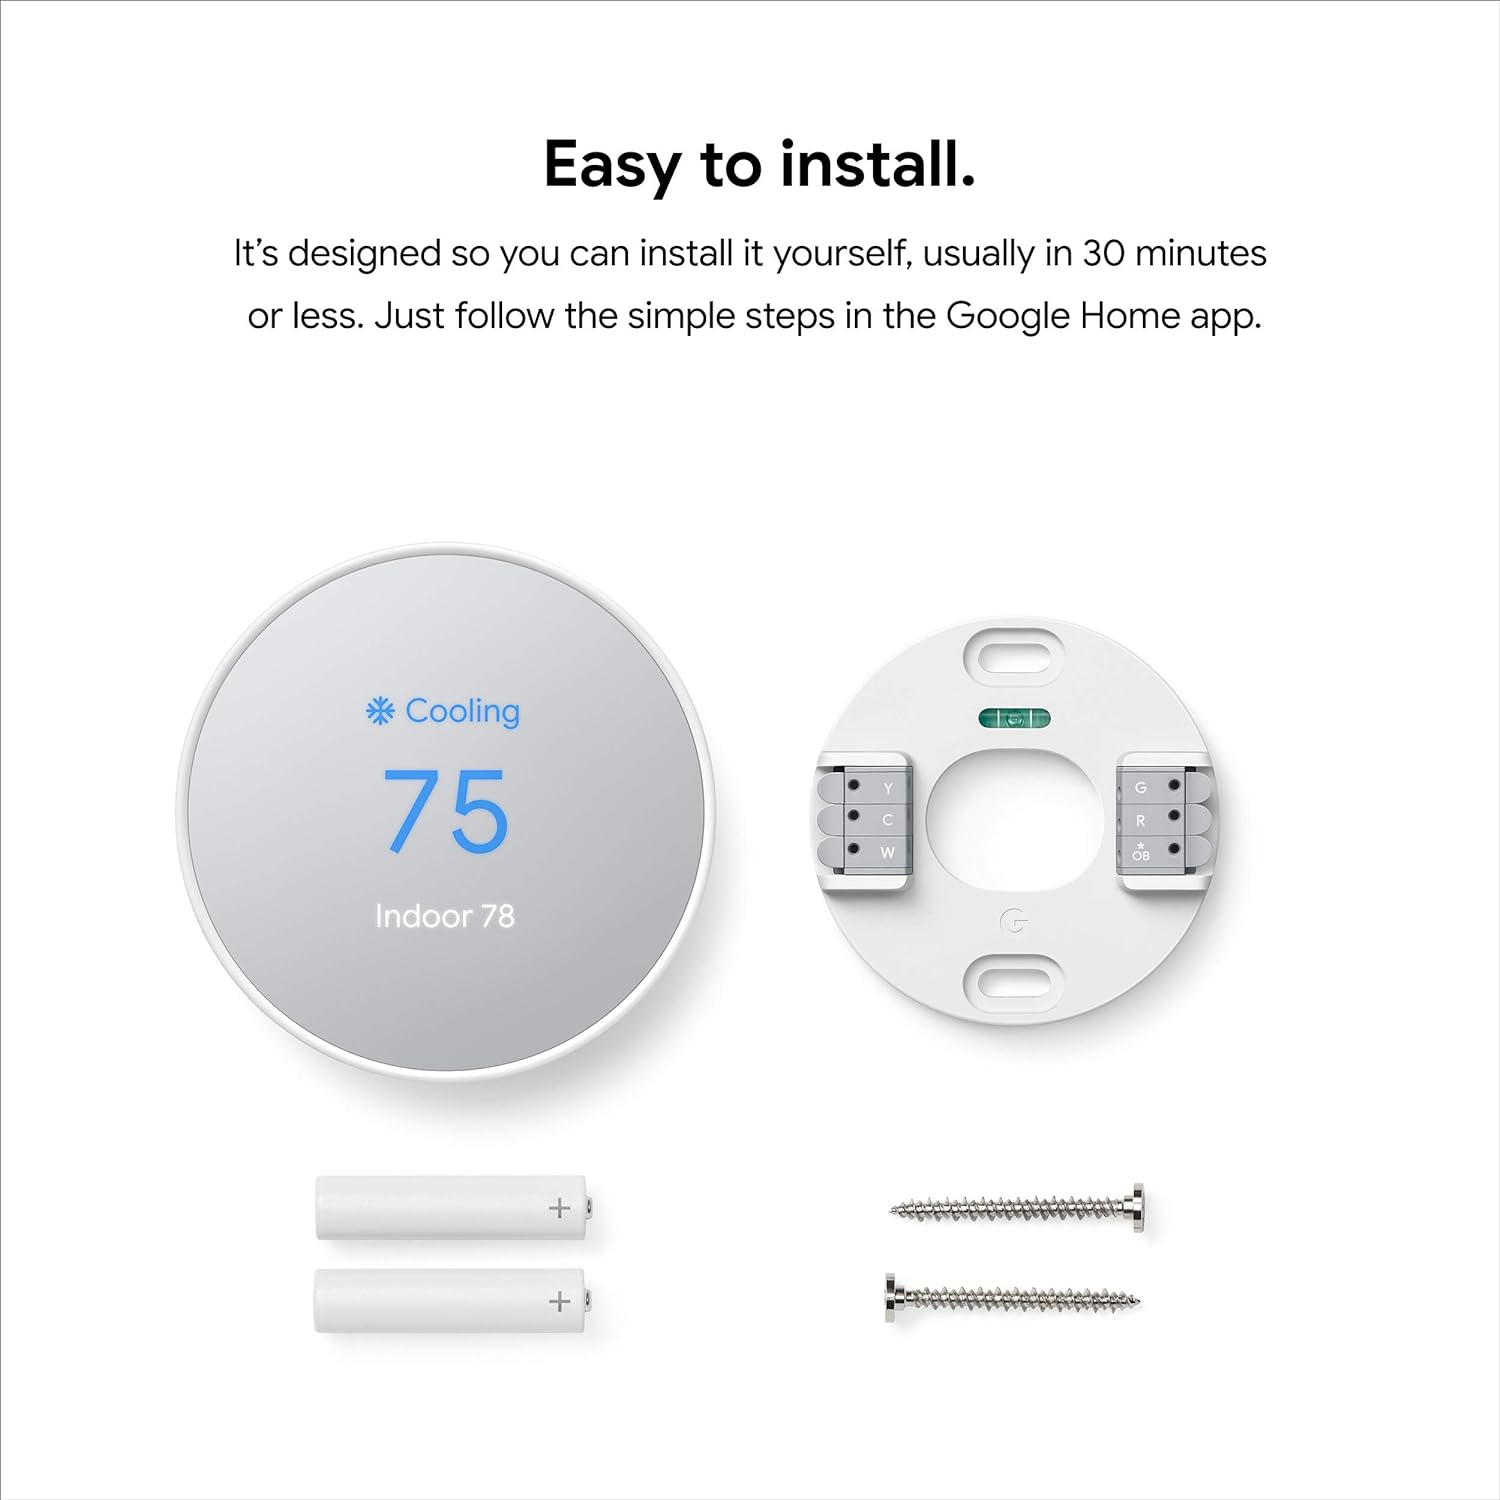 Google Nest Thermostat - Smart Thermostat for Home - Programmable Wifi Thermostat - Fog